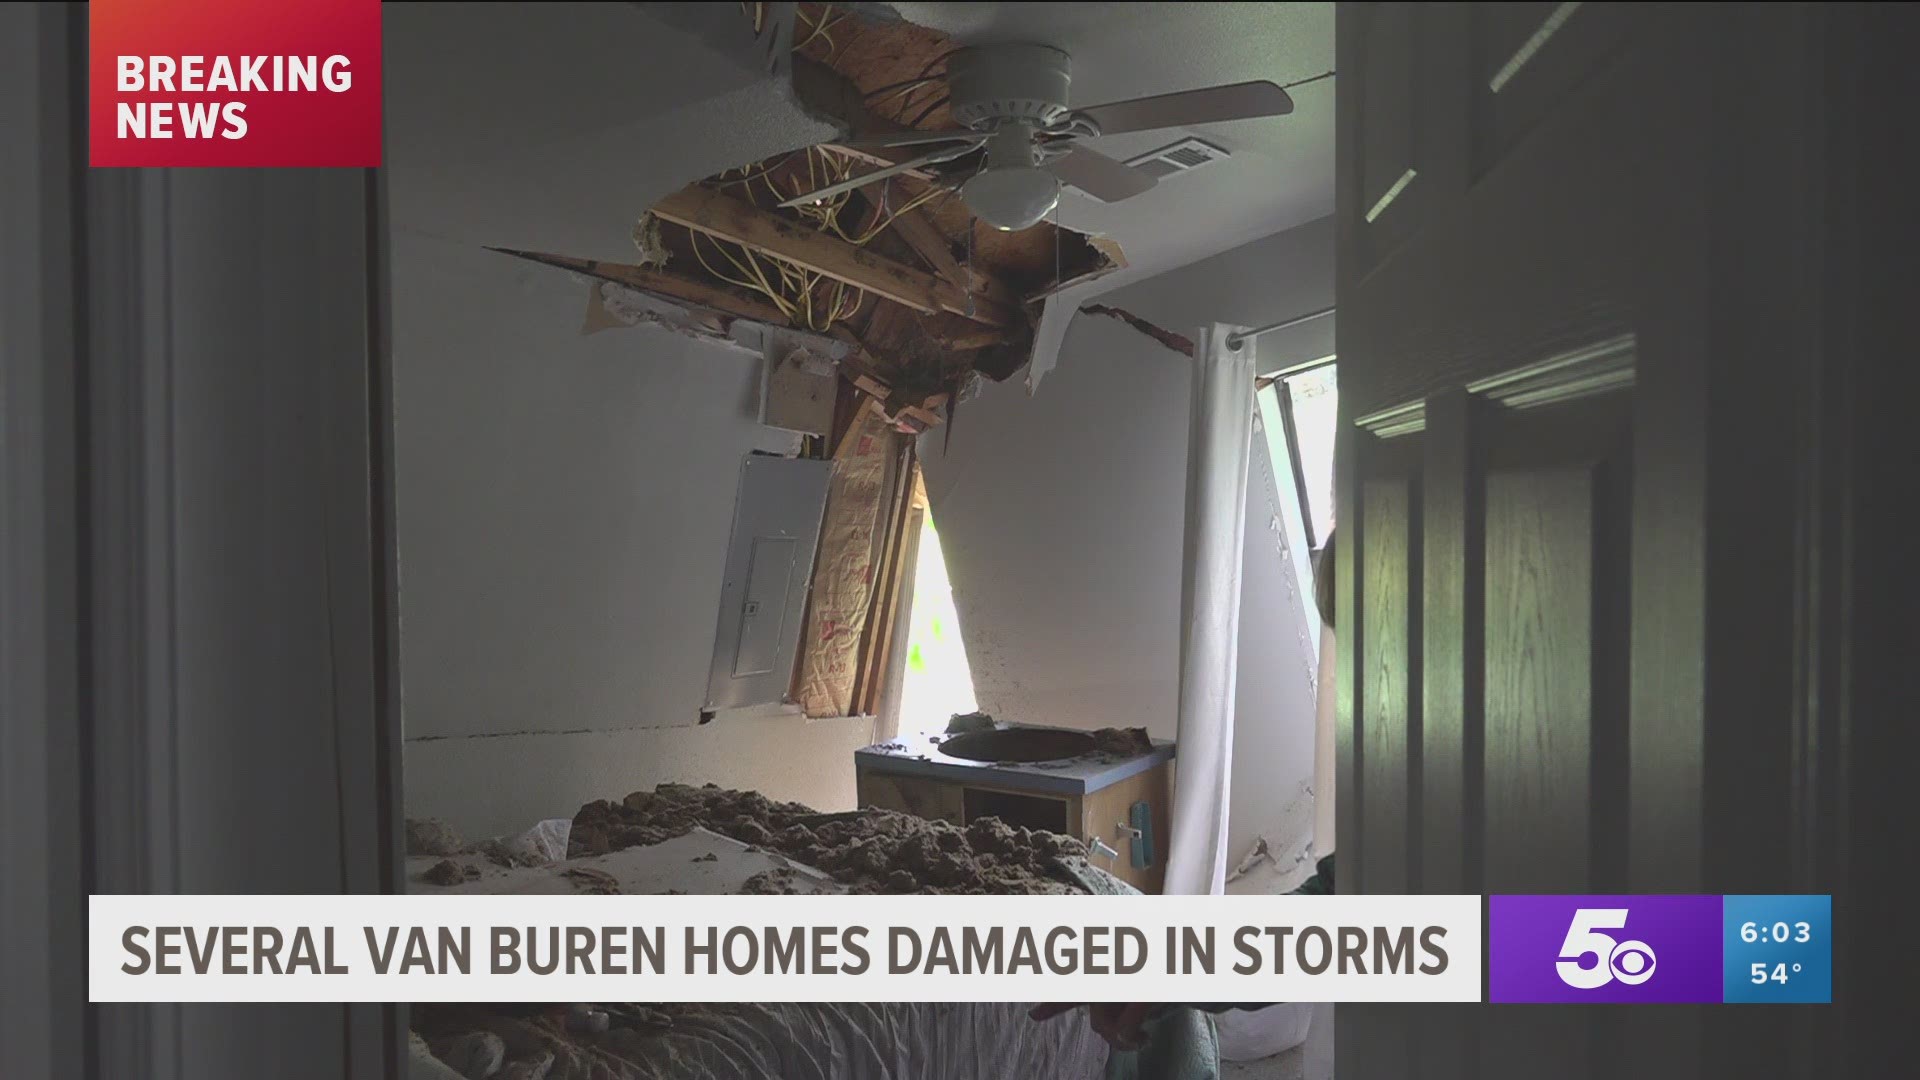 Residents in Van Buren are now picking up the pieces after several uprooted trees are caused damage to homes in the area.